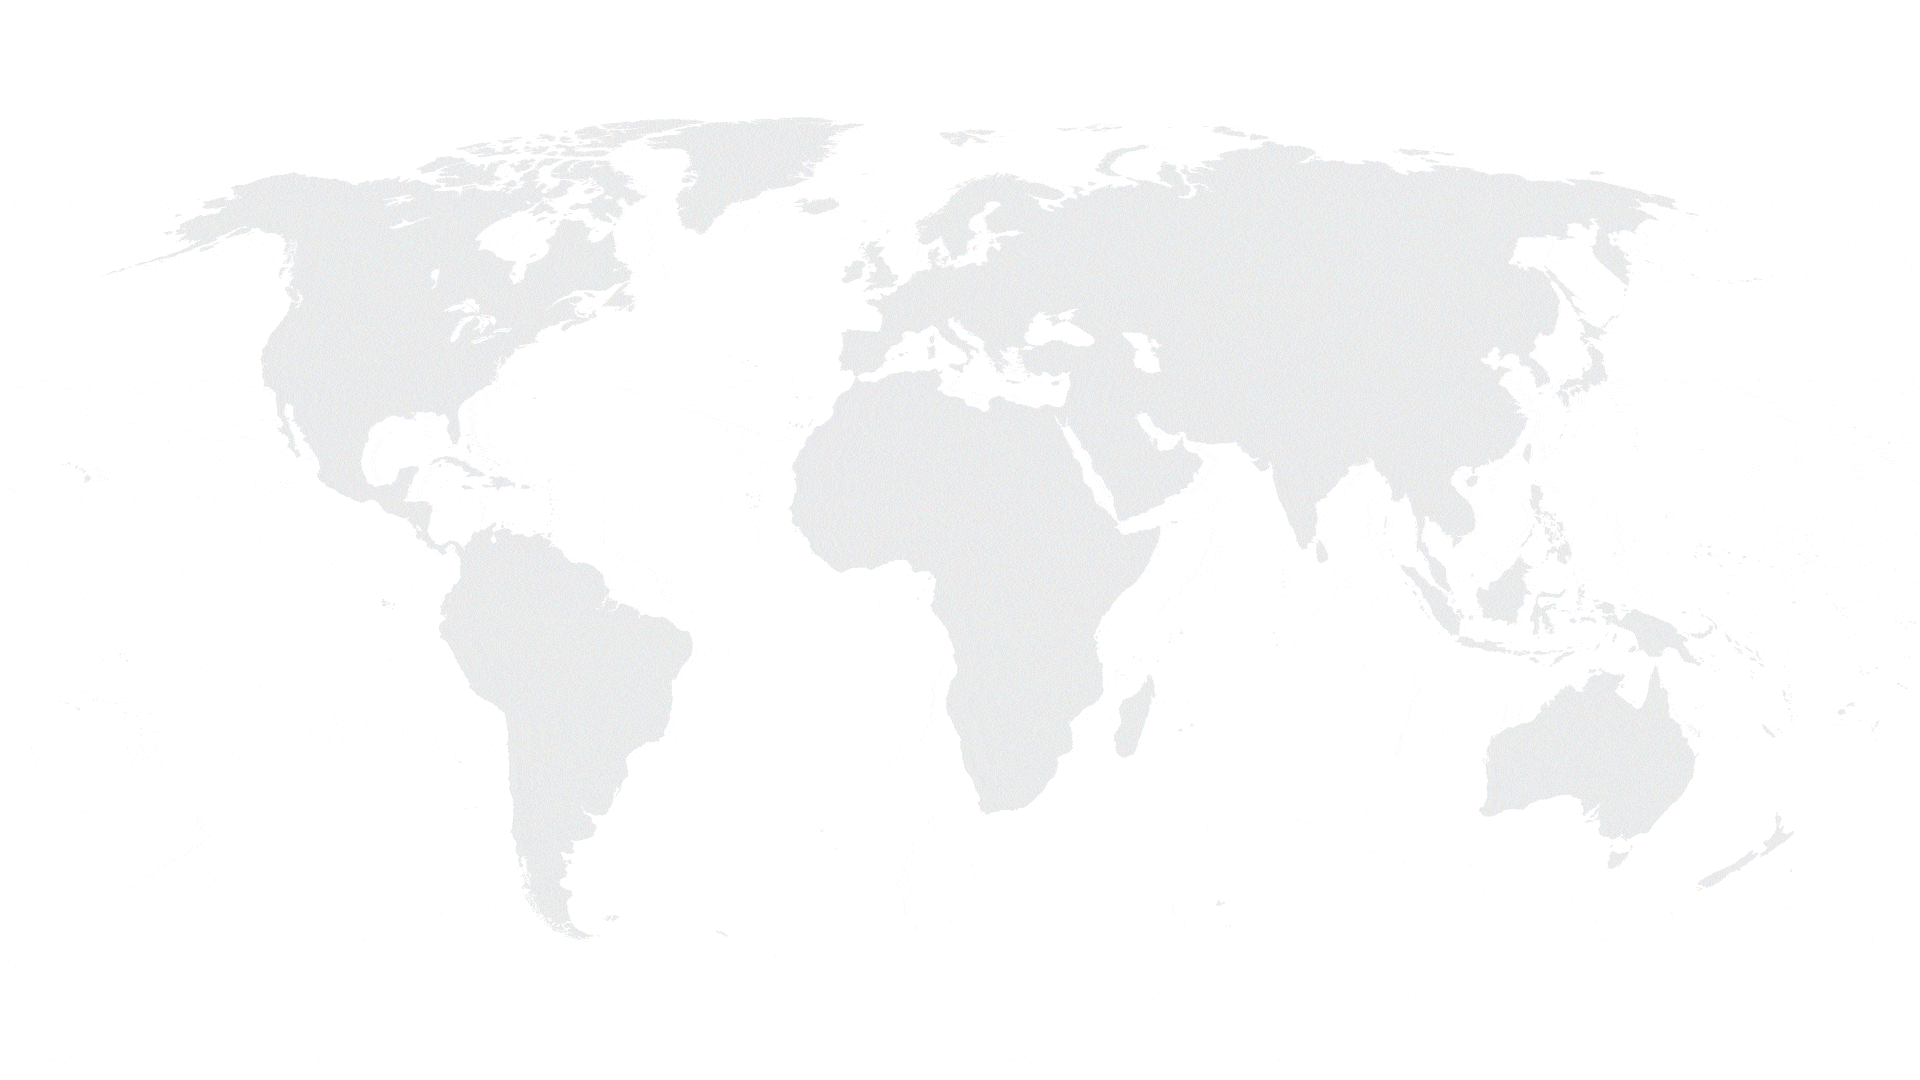 animated map of all countries that have received a gender seal